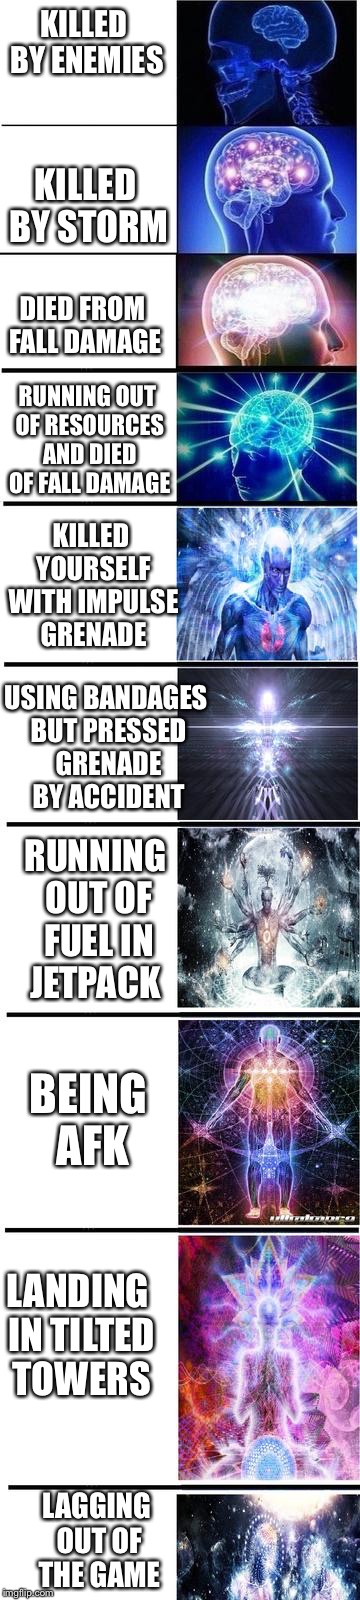 expanding brain | KILLED BY ENEMIES; KILLED BY STORM; DIED FROM FALL DAMAGE; RUNNING OUT OF RESOURCES AND DIED OF FALL DAMAGE; KILLED YOURSELF WITH IMPULSE GRENADE; USING BANDAGES BUT PRESSED GRENADE BY ACCIDENT; RUNNING OUT OF FUEL IN JETPACK; BEING AFK; LANDING IN TILTED TOWERS; LAGGING OUT OF THE GAME | image tagged in expanding brain | made w/ Imgflip meme maker